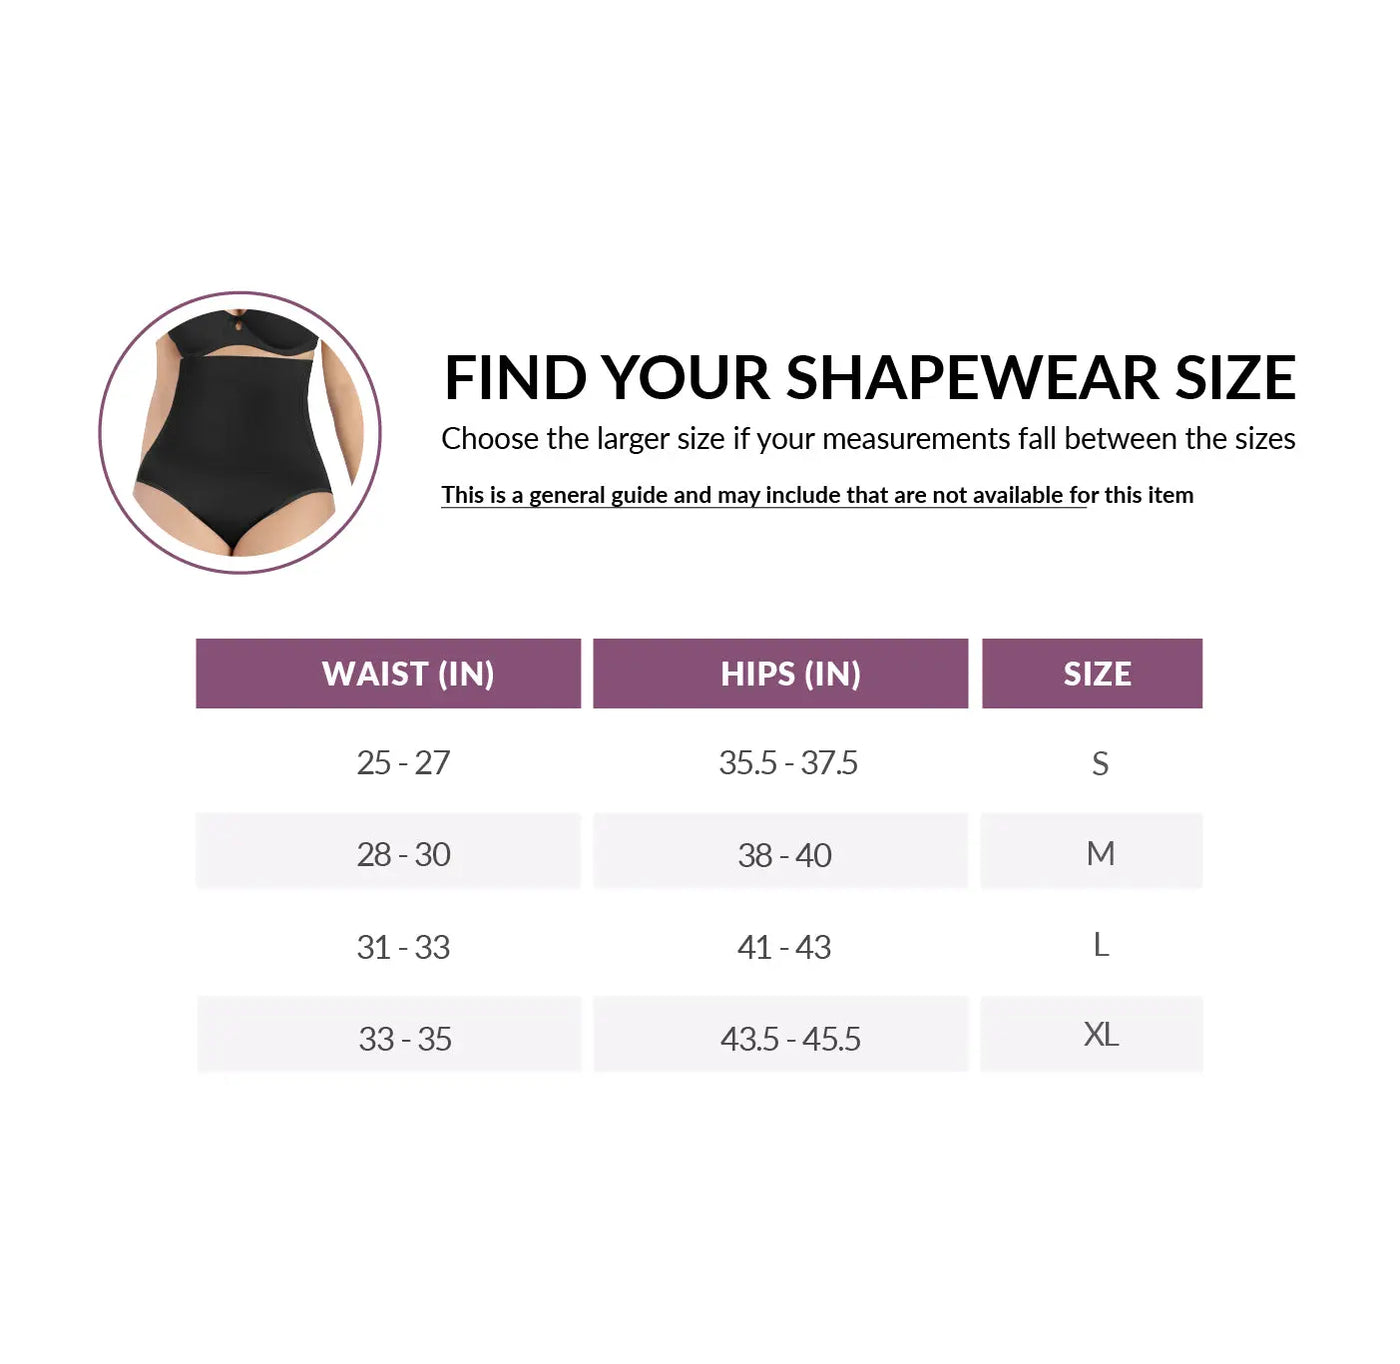 NEW shapewear for tummy control and bralette from @curveez ! 😍 Use th